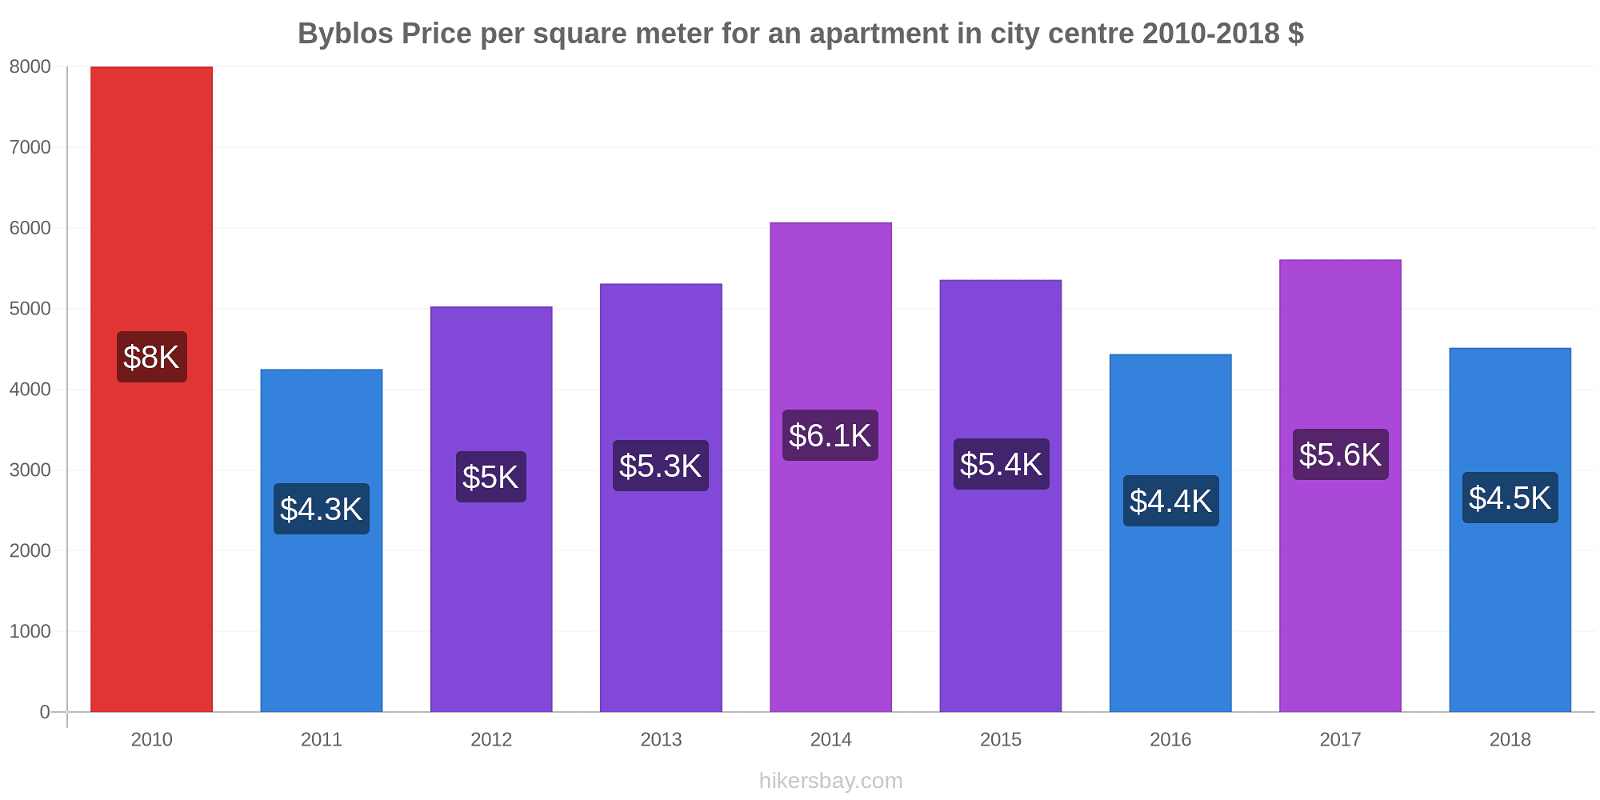 Byblos price changes Price per square meter for an apartment in city centre hikersbay.com